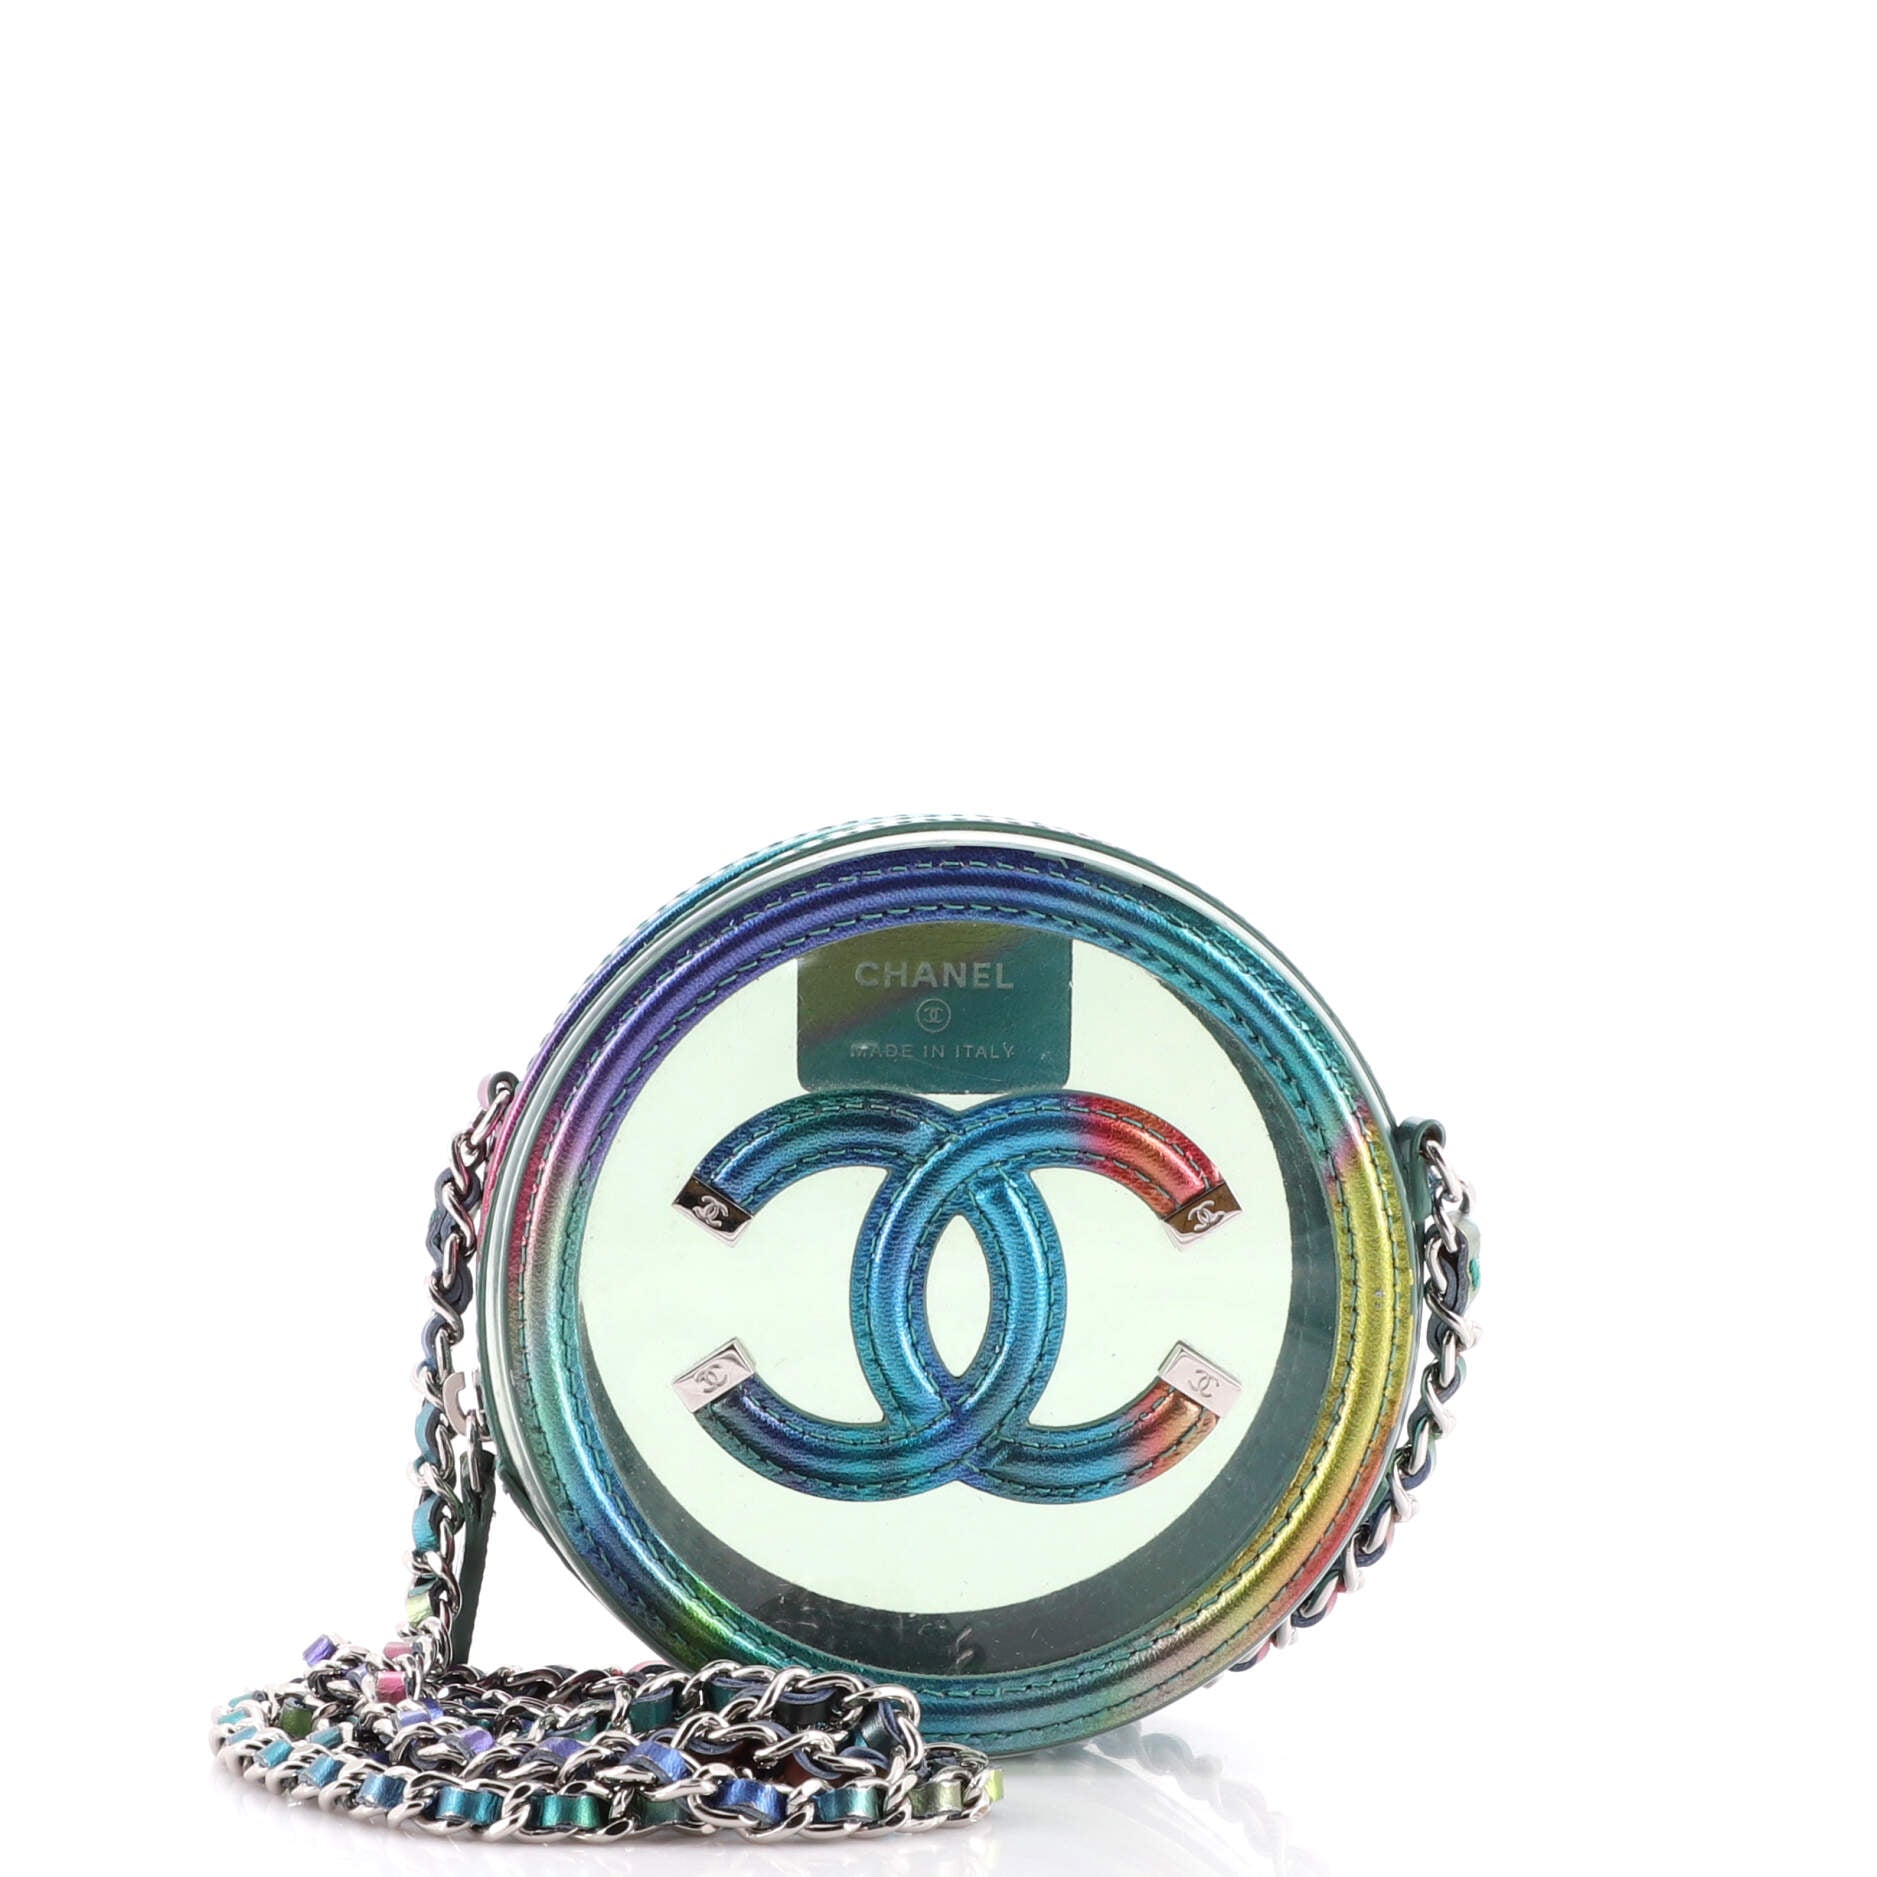 CHANEL Filigree Round Clutch with Chain PVC with Lambskin Mini